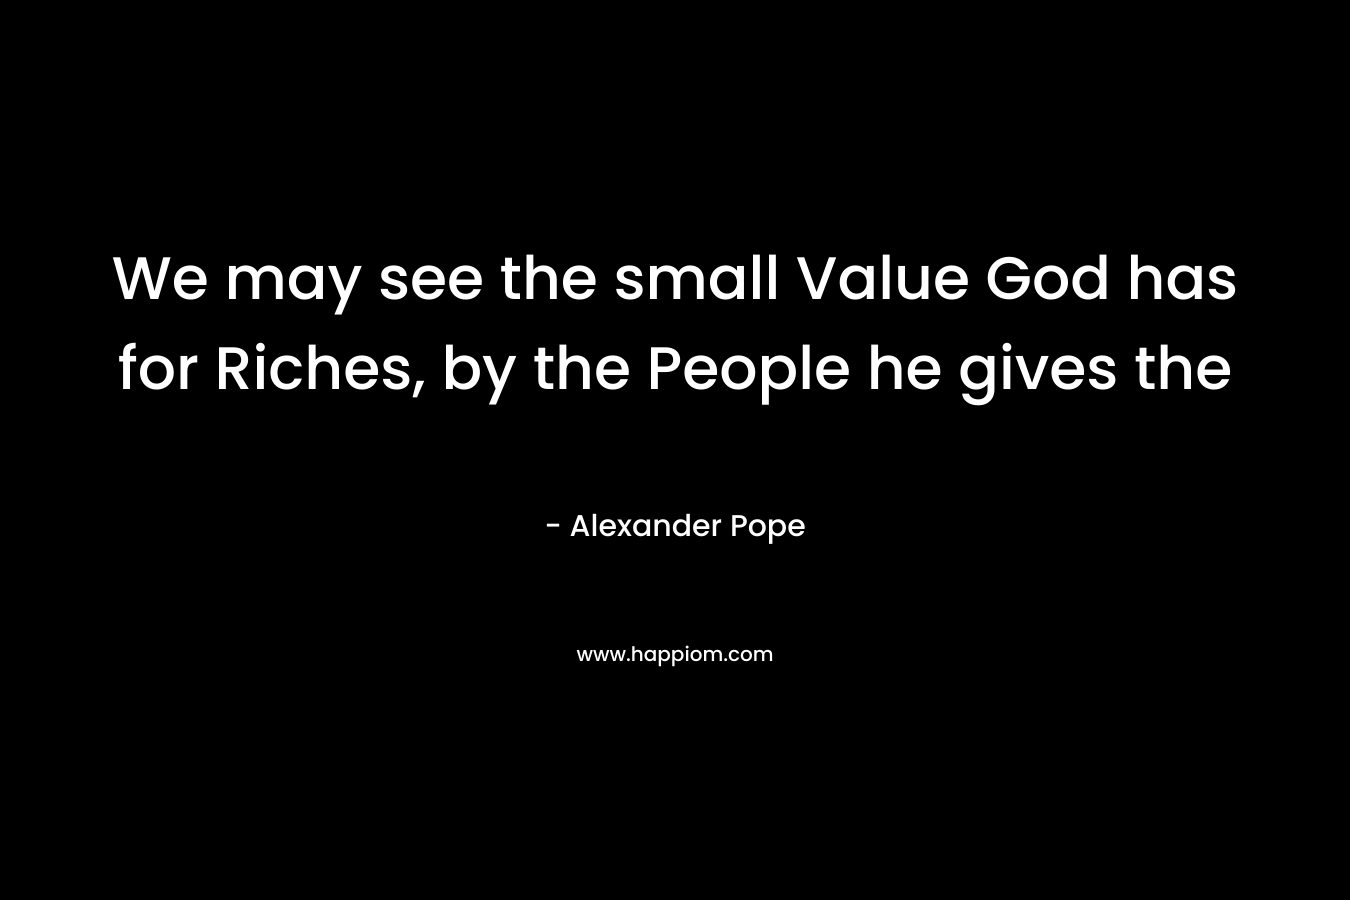 We may see the small Value God has for Riches, by the People he gives the – Alexander Pope